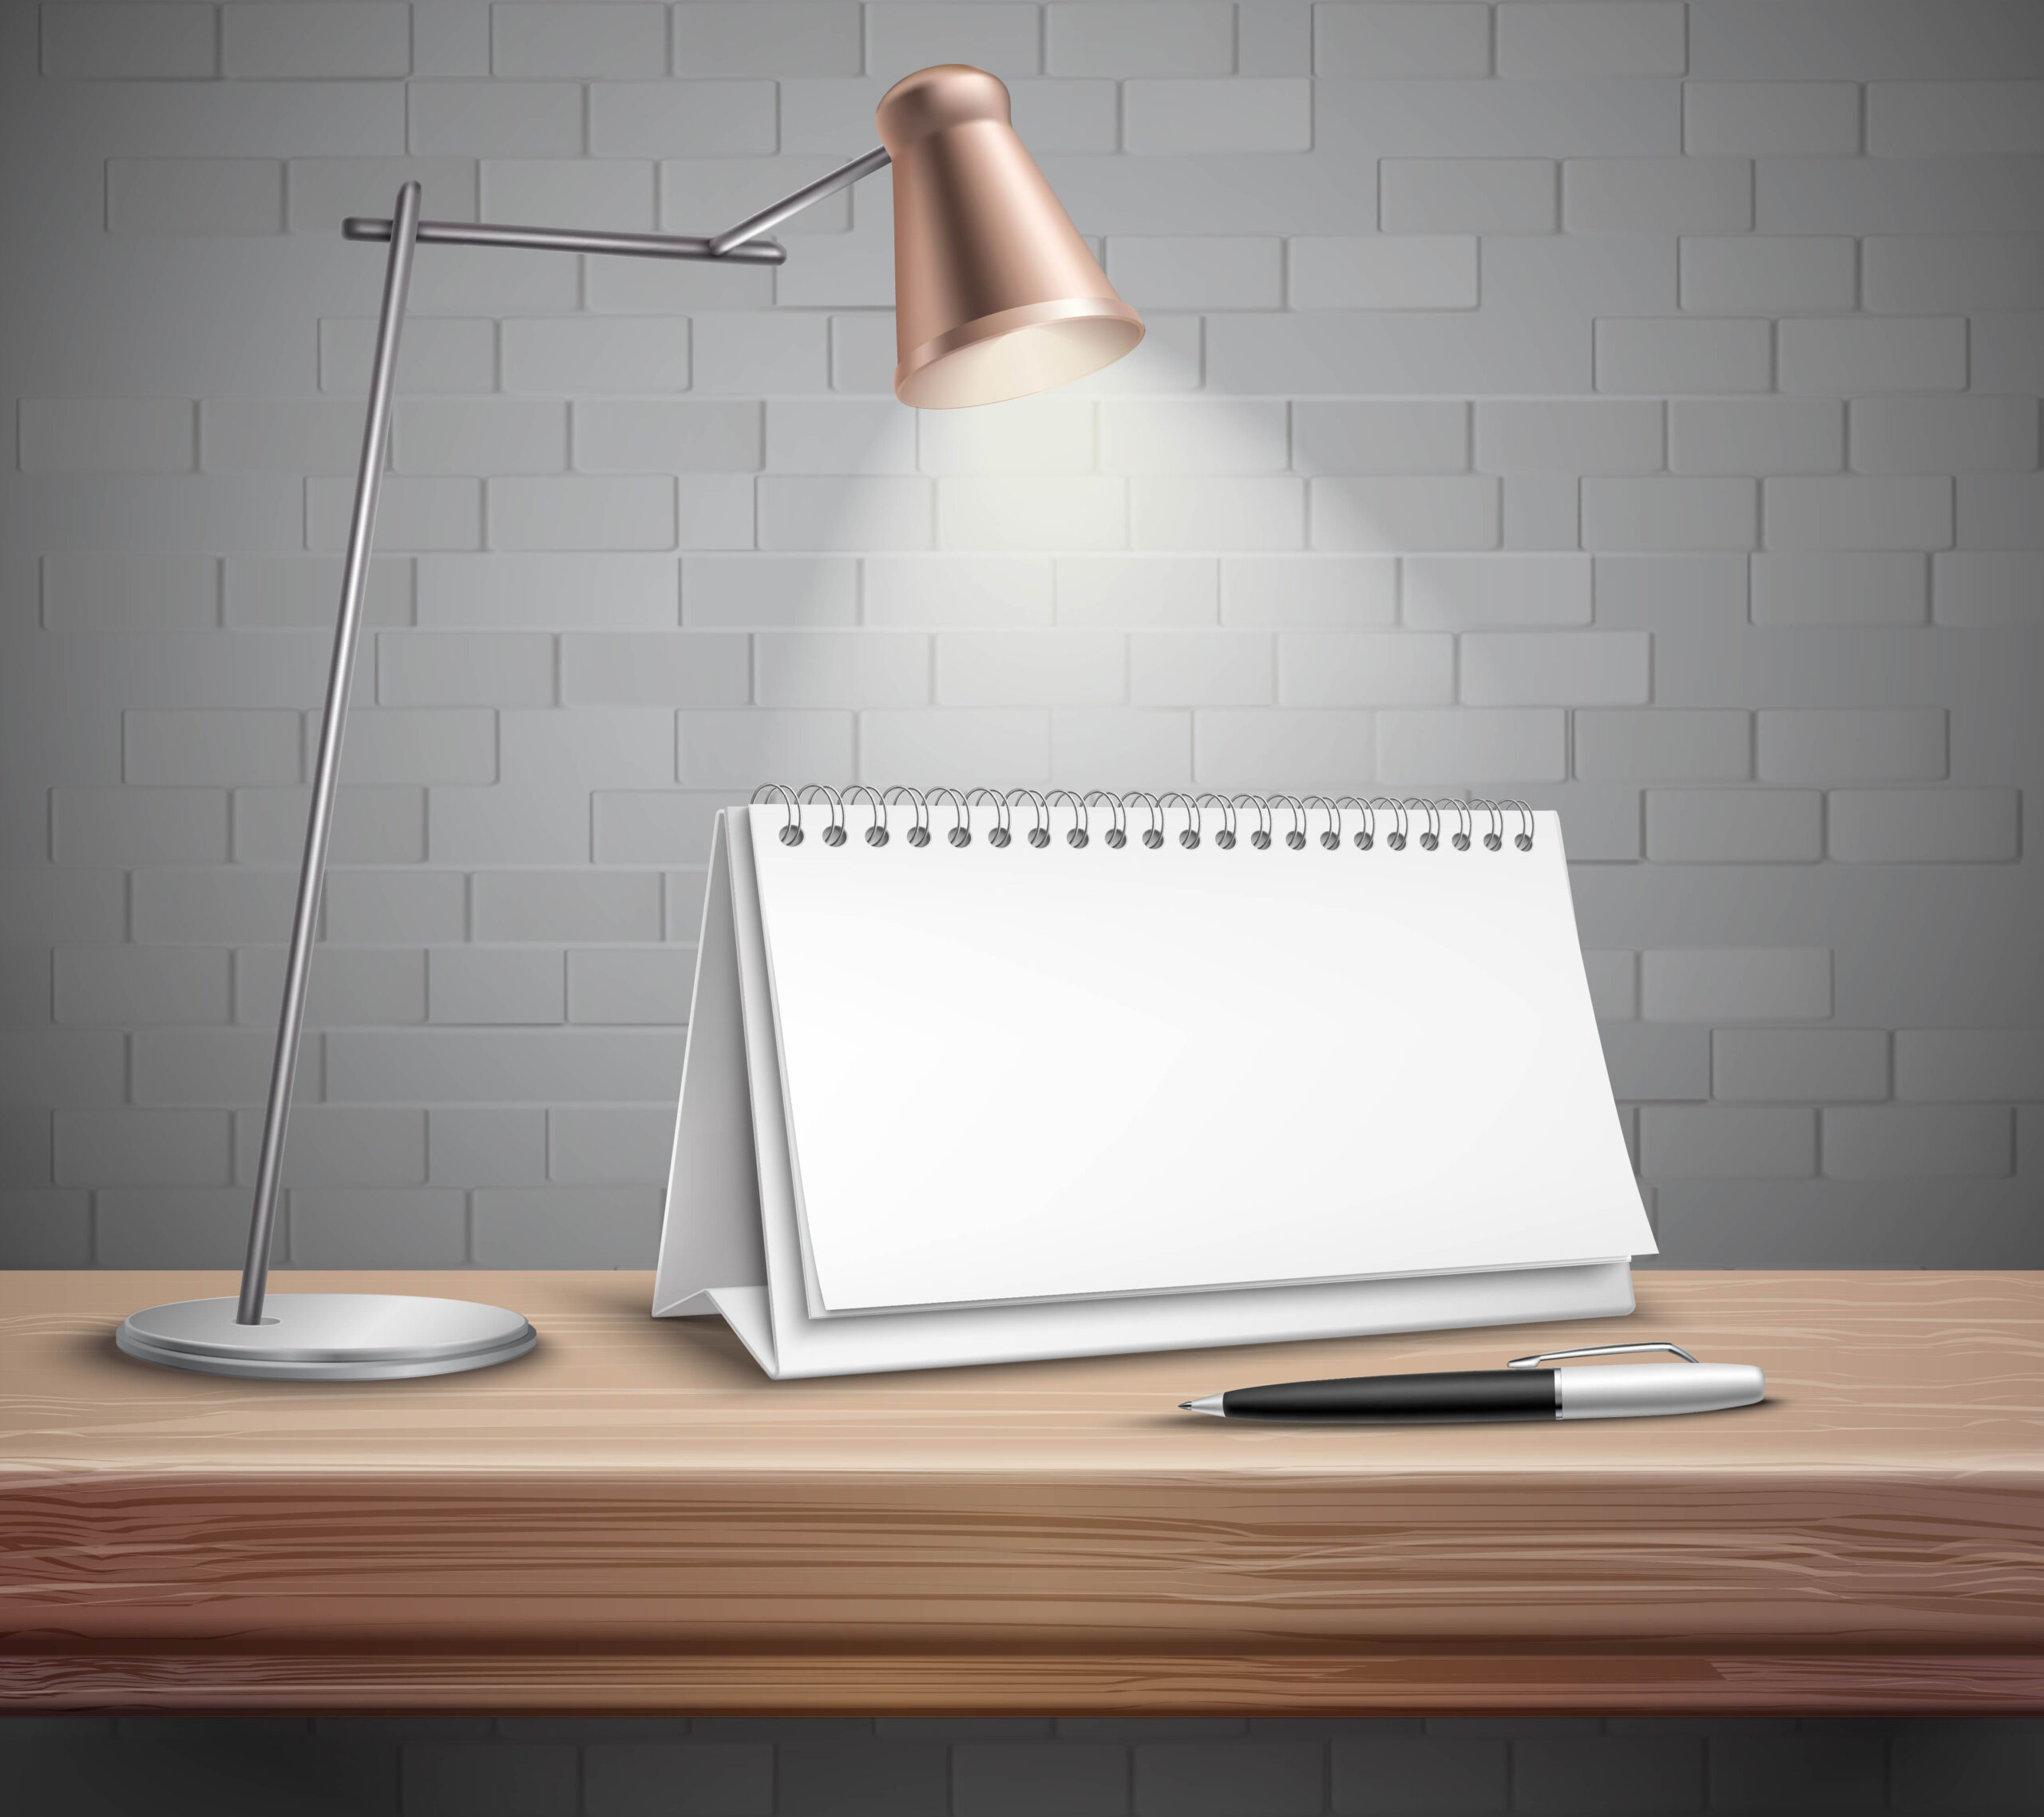 Blank Desk Calendar On Table Concept 483256 Download Free Vectors throughout To Desk Free Download